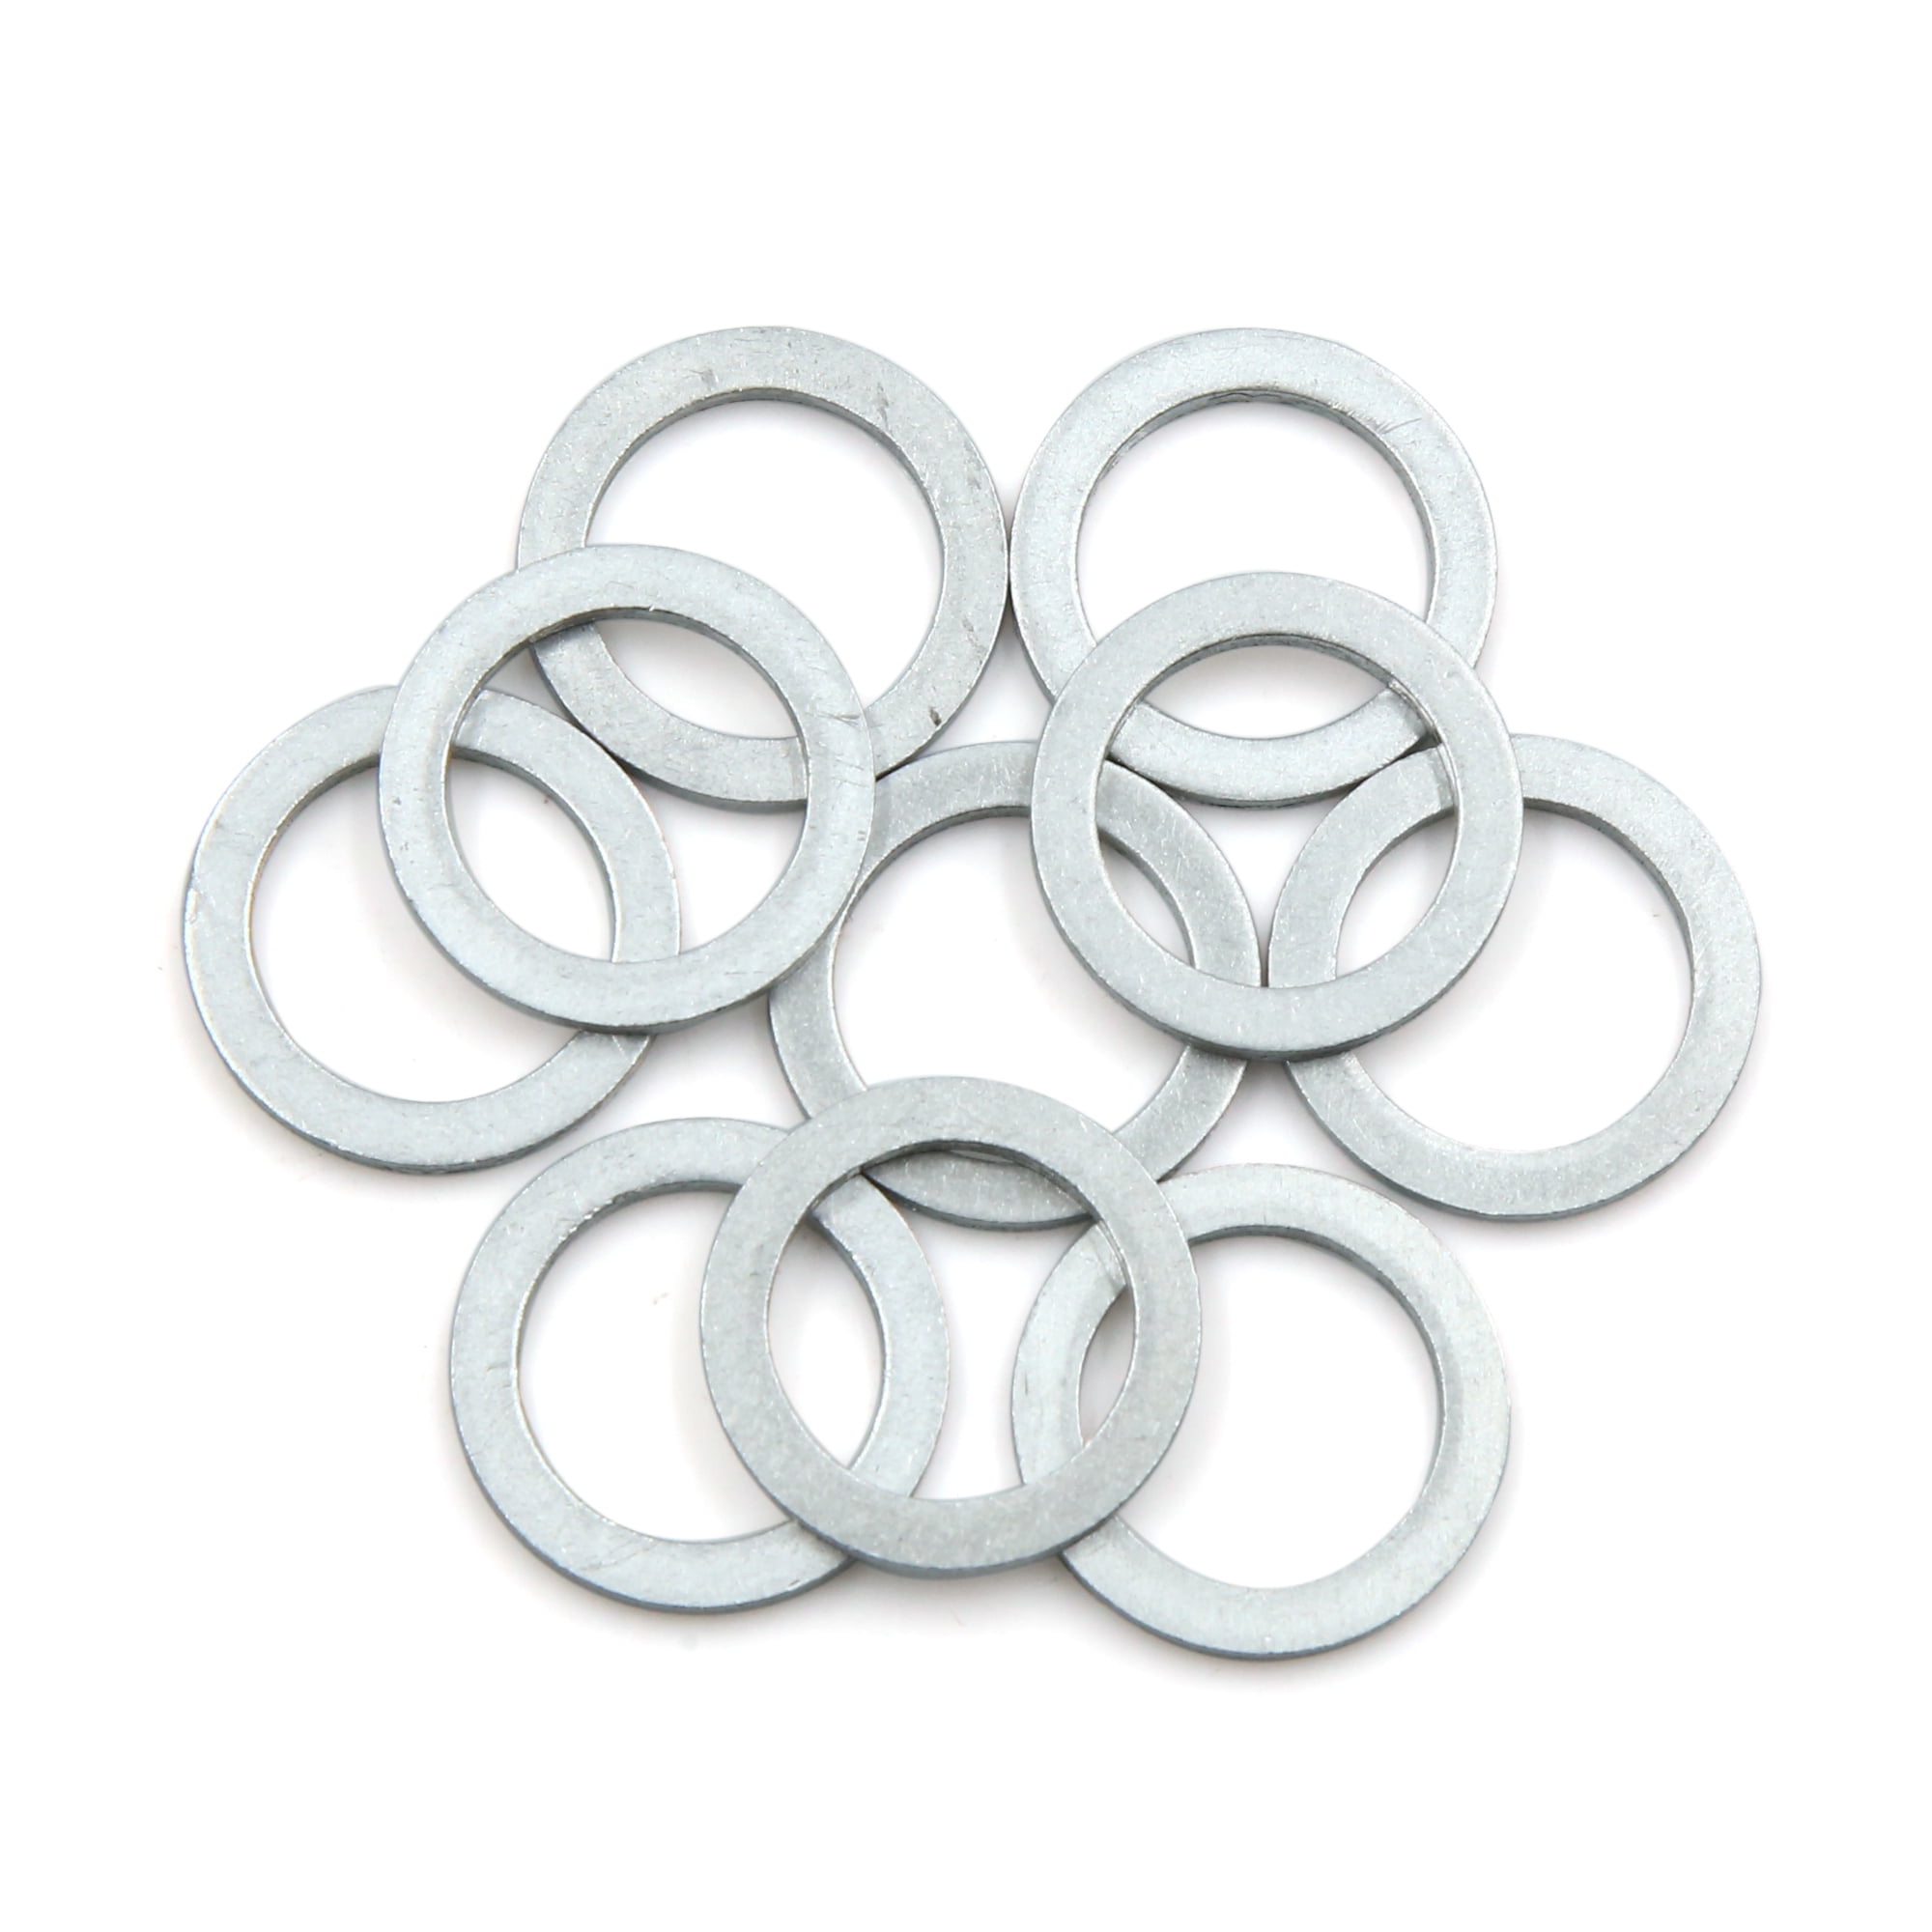 5x Universal Auto O Rings Seal Crush Washers Inside 12mm Outside 16mm Diameter 